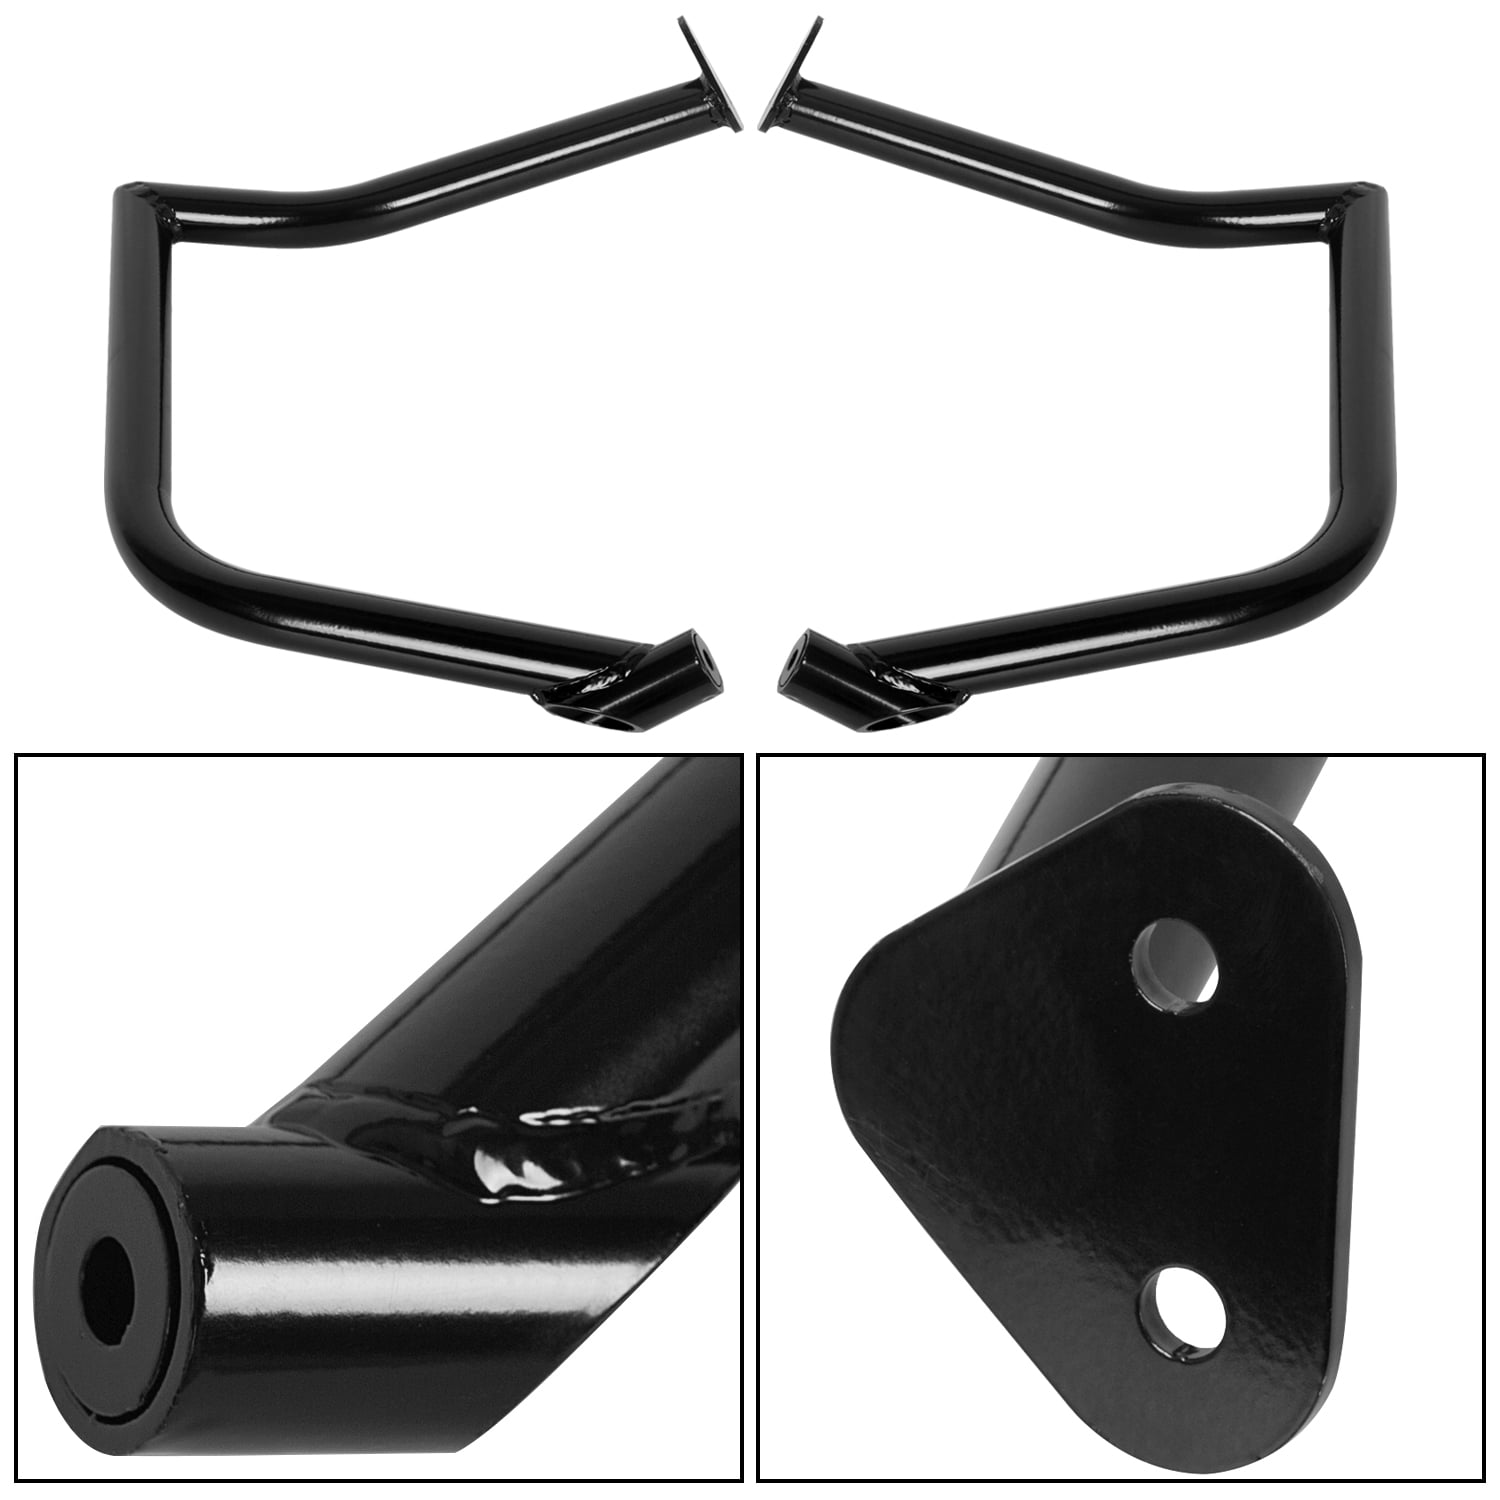 ECOTRIC Highway Engine Guard Crash Bars Steel Compatible with 2010-2017 Victory Cross Country Roads Magnum